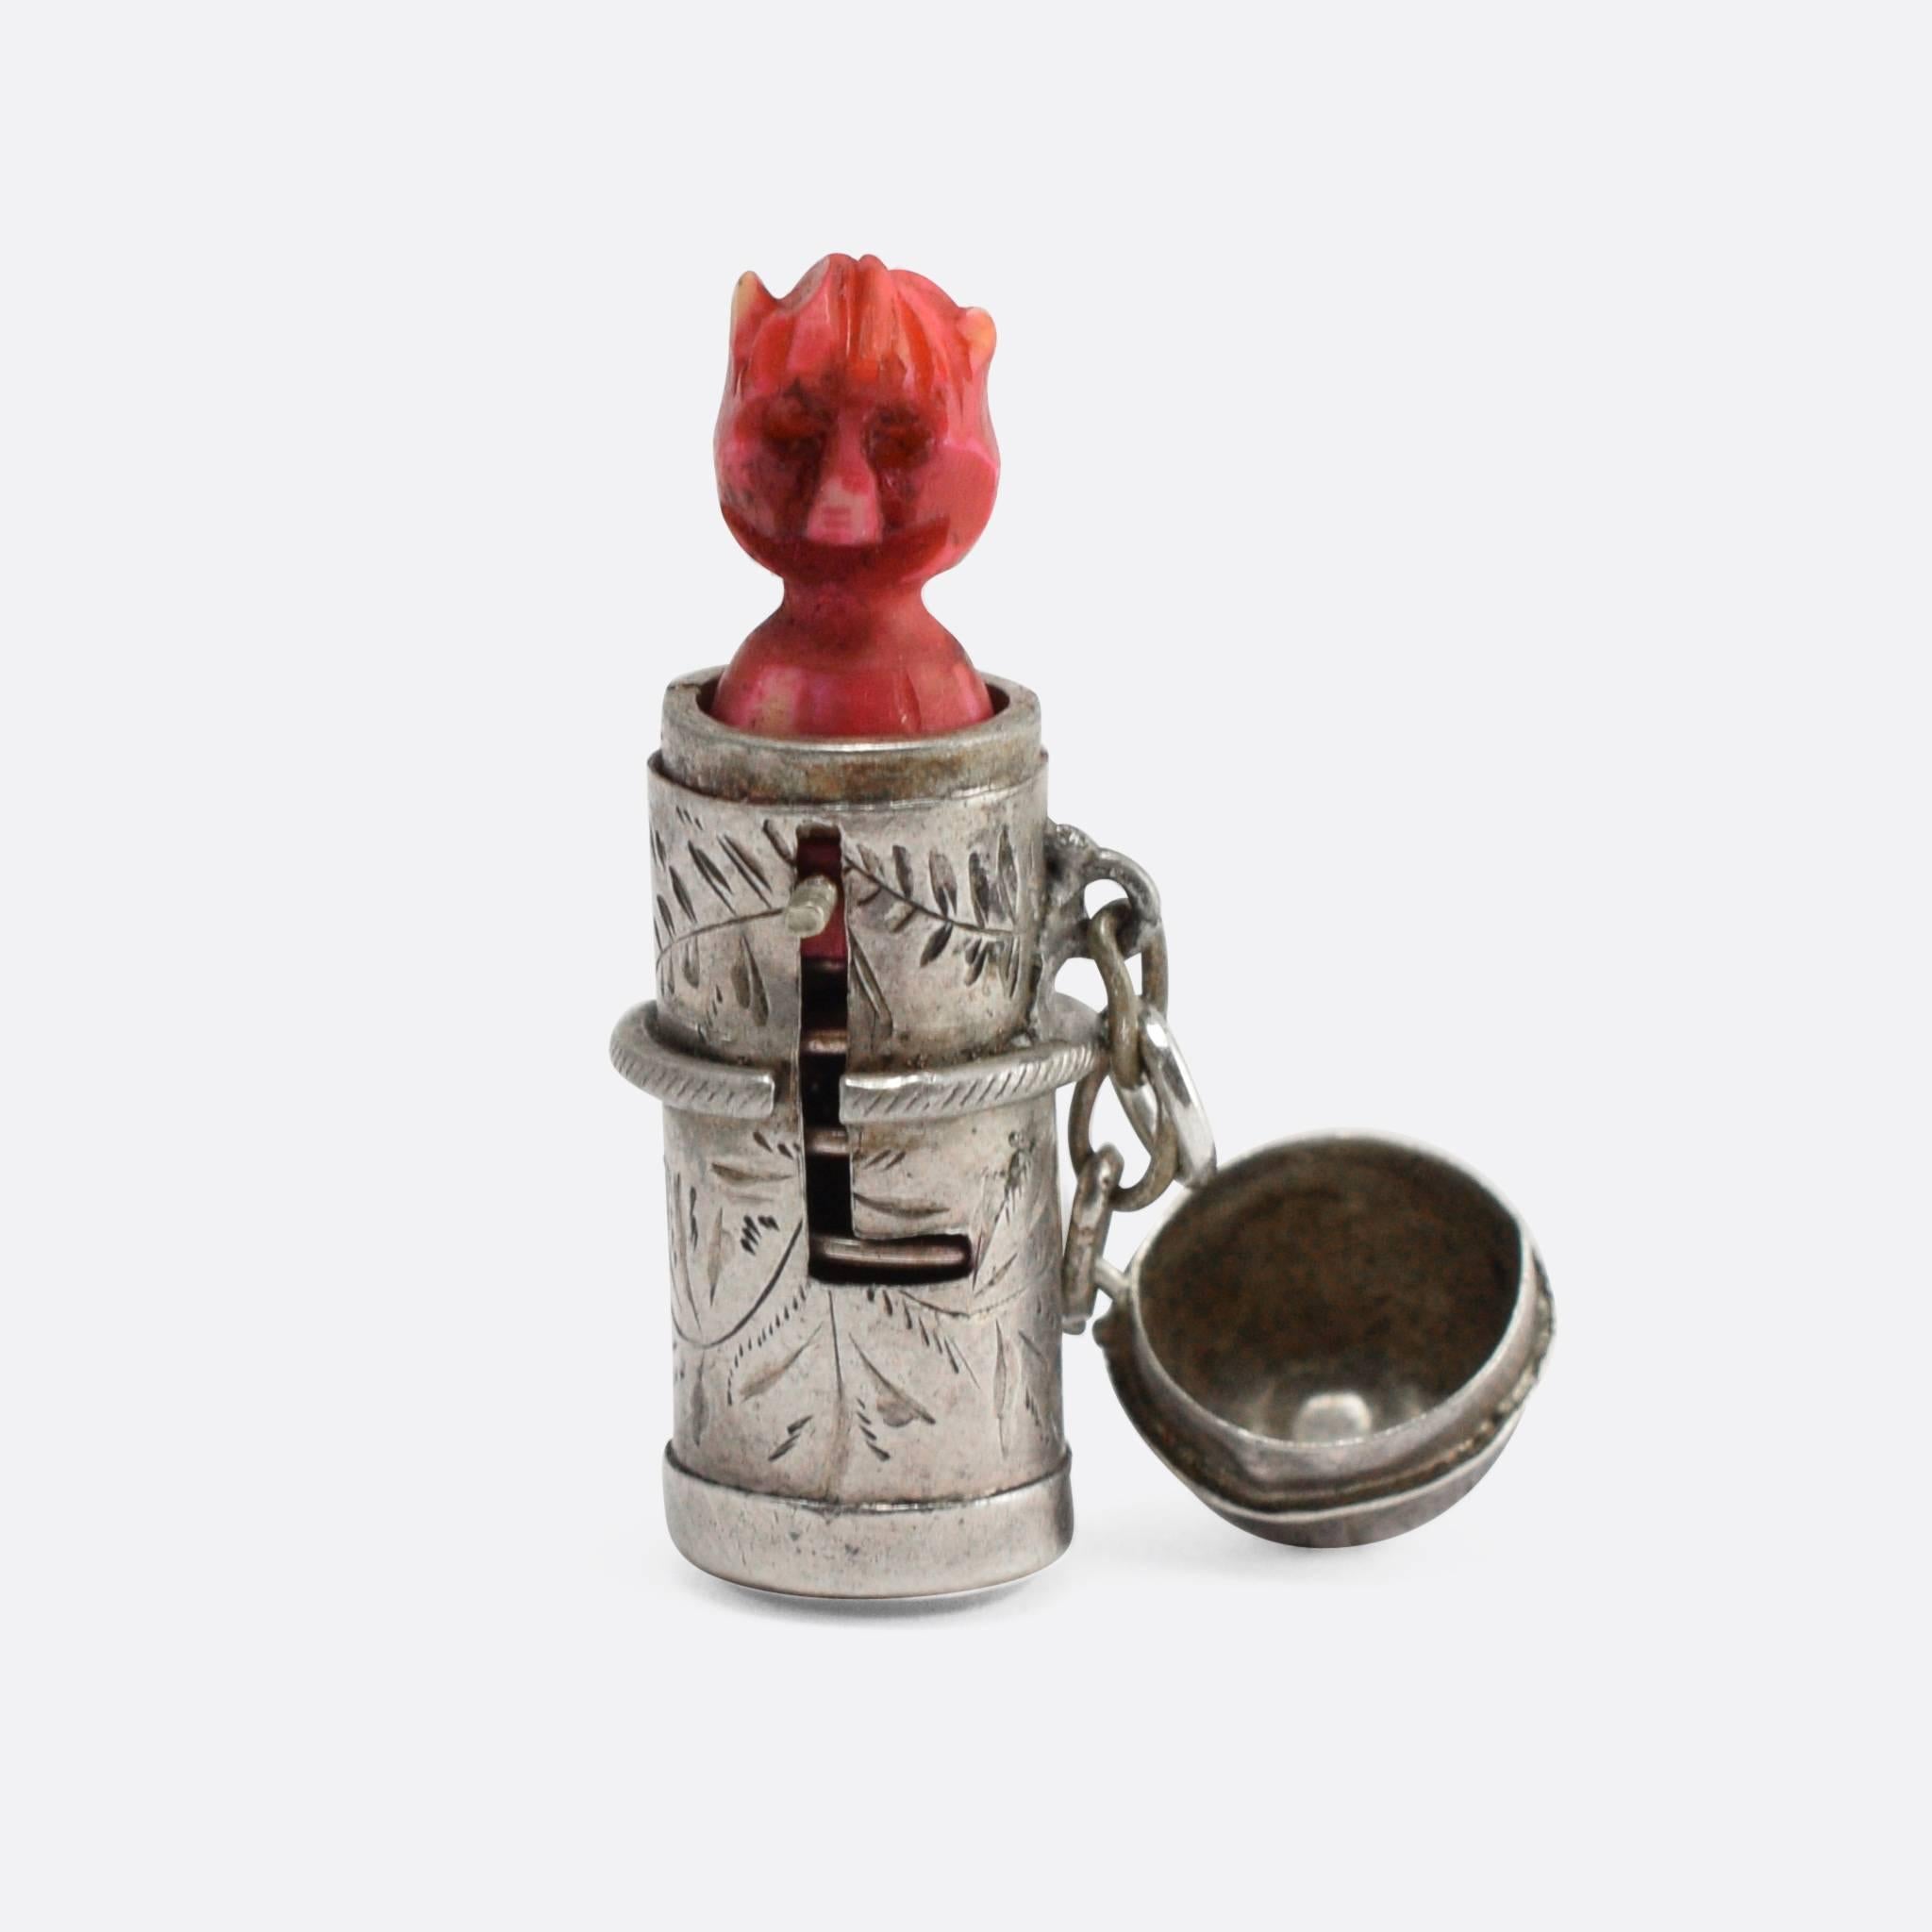 This cool antique charm pendant is modelled in sterling silver, attractively embellished with hand-chased detailing all around. On cue, the spring-loaded red devil creature pops out of the box - throwing the lid off the top.  A charming novelty